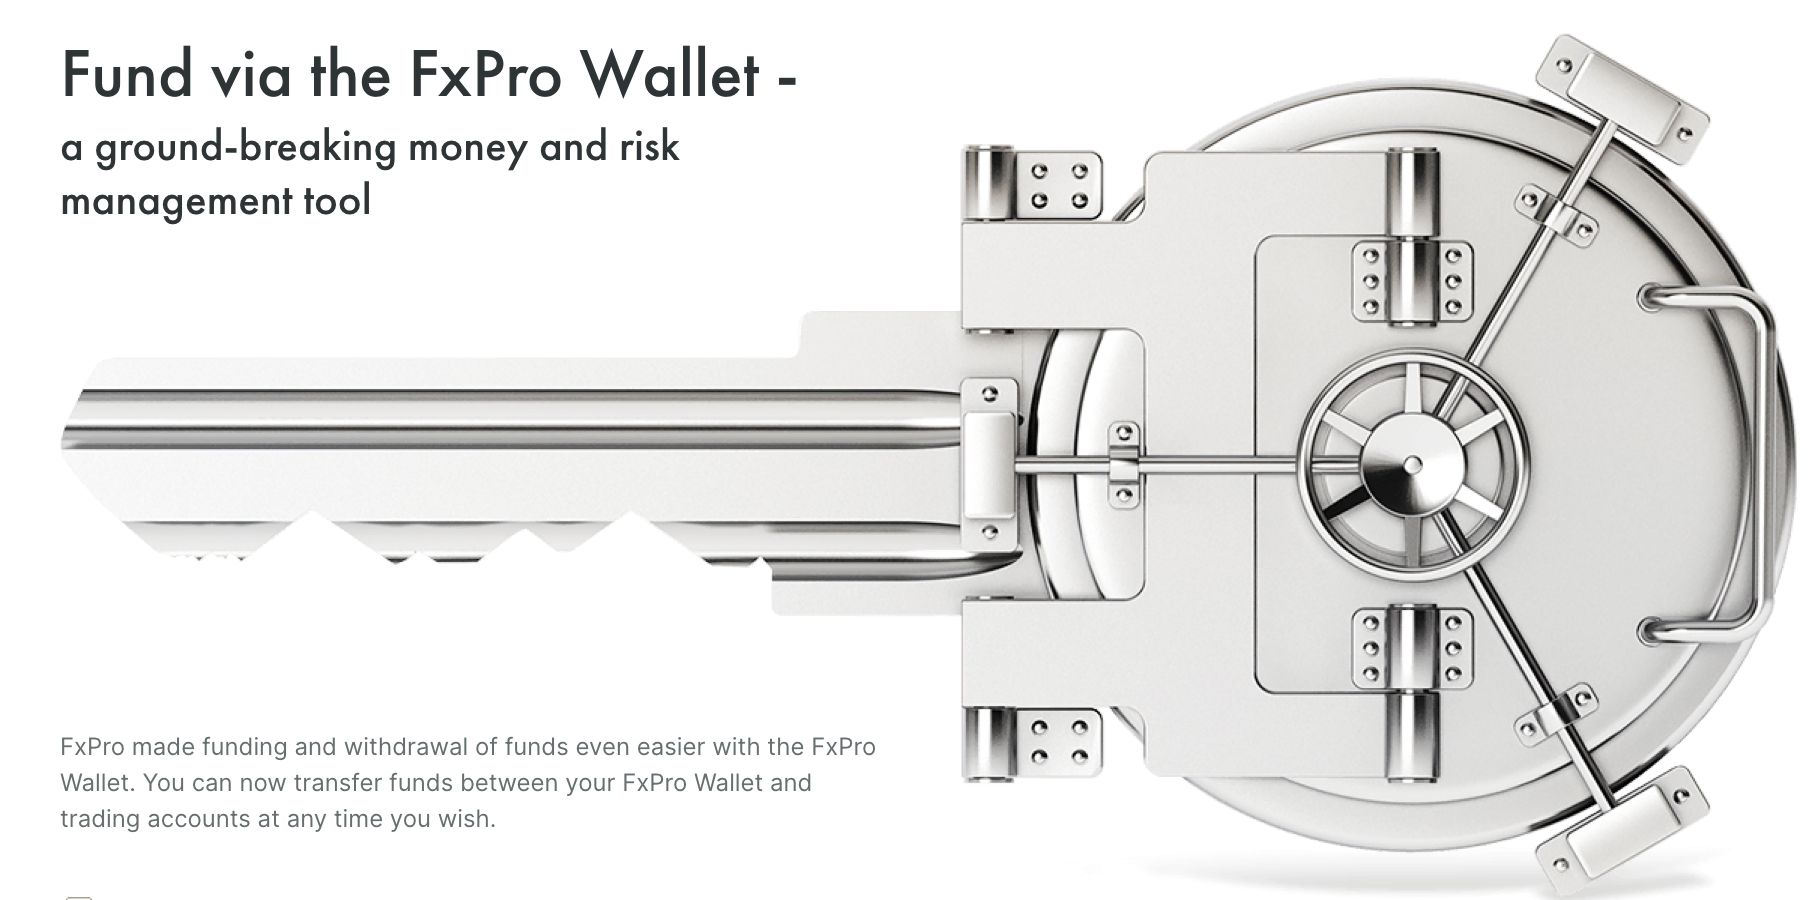 FX pro offers you a special wallet feature